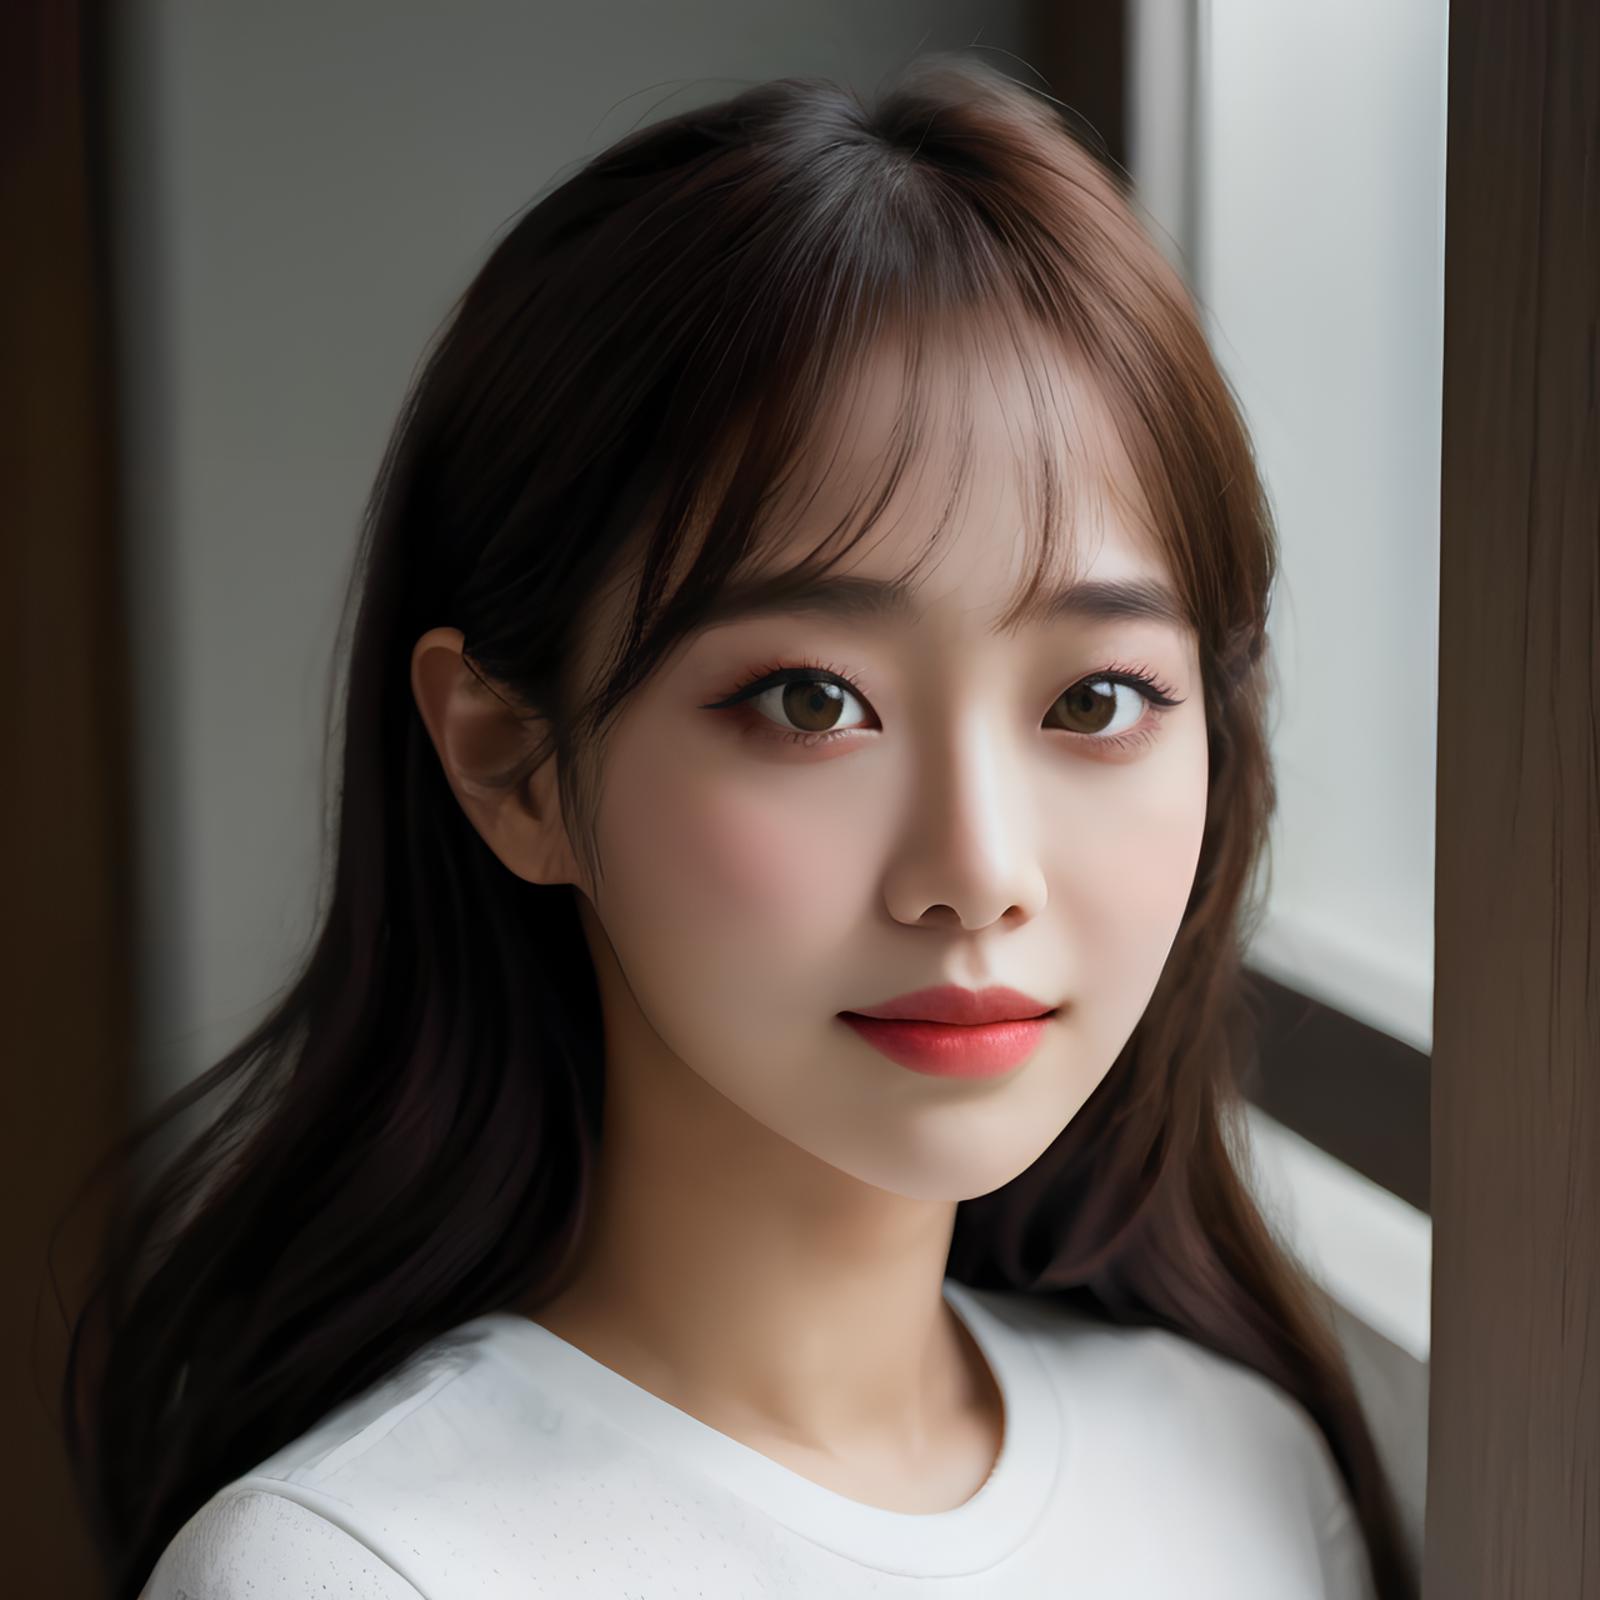 Not Loona - Chuu image by Tissue_AI